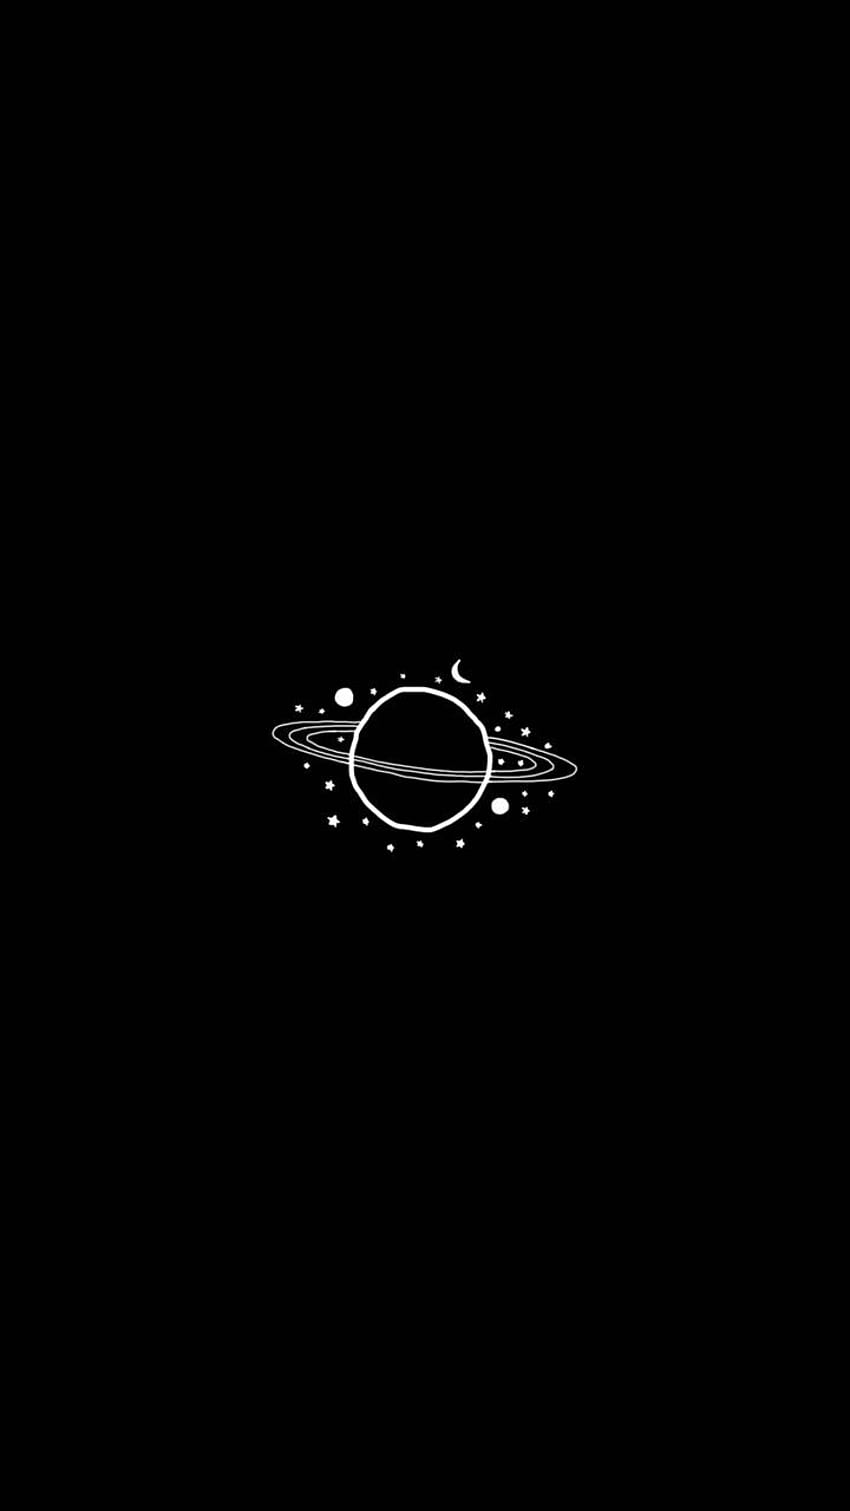 Drawn Saturn and Background, Black and White Saturn HD phone wallpaper